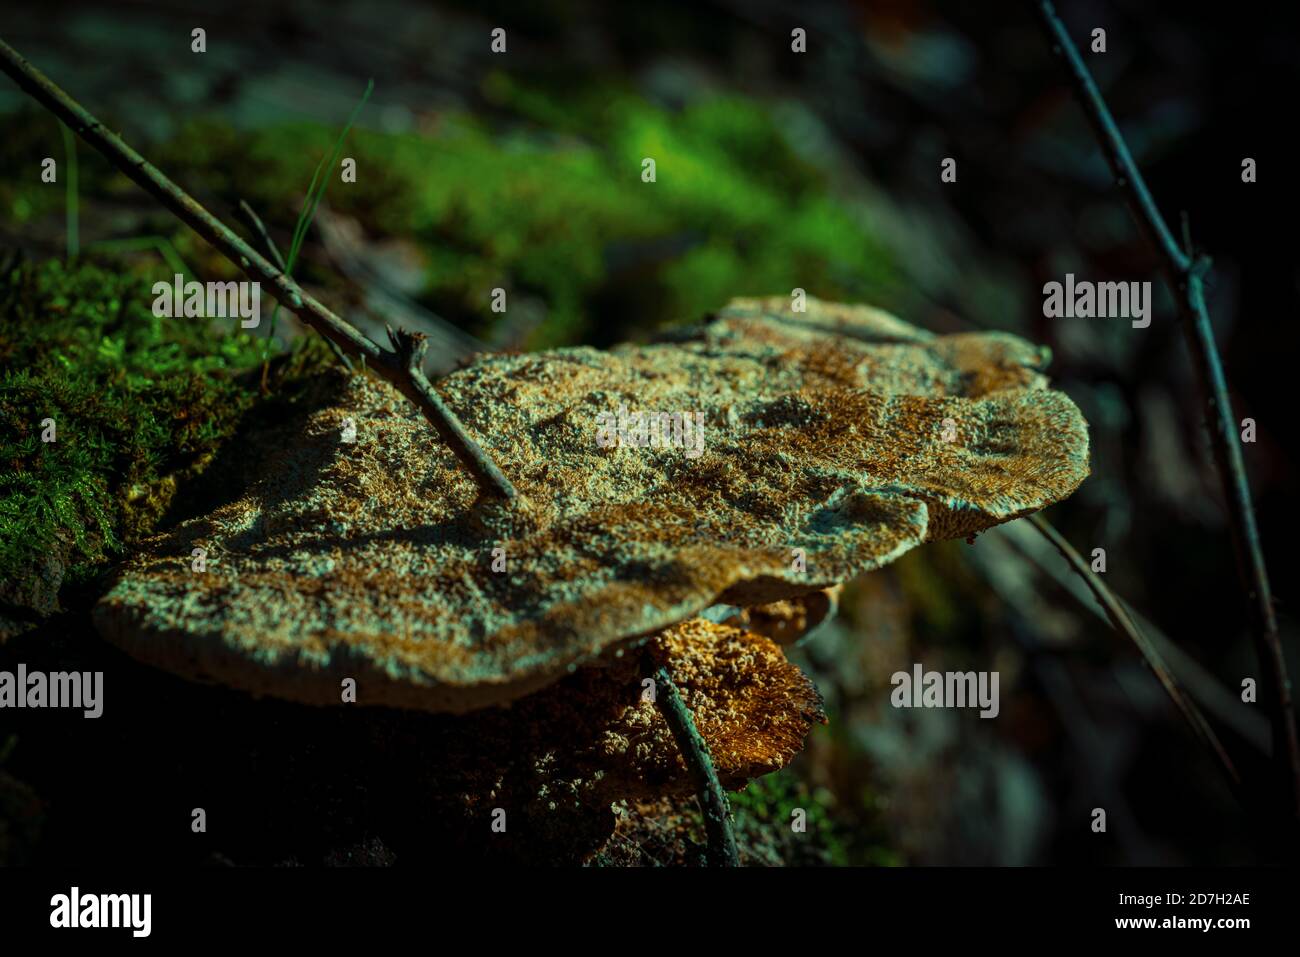 Fungi growing wild in an artistic dark forest setting, green moss surroundings as background. Dark shadows and earthy colors. Photograph: Tony Taylor Stock Photo